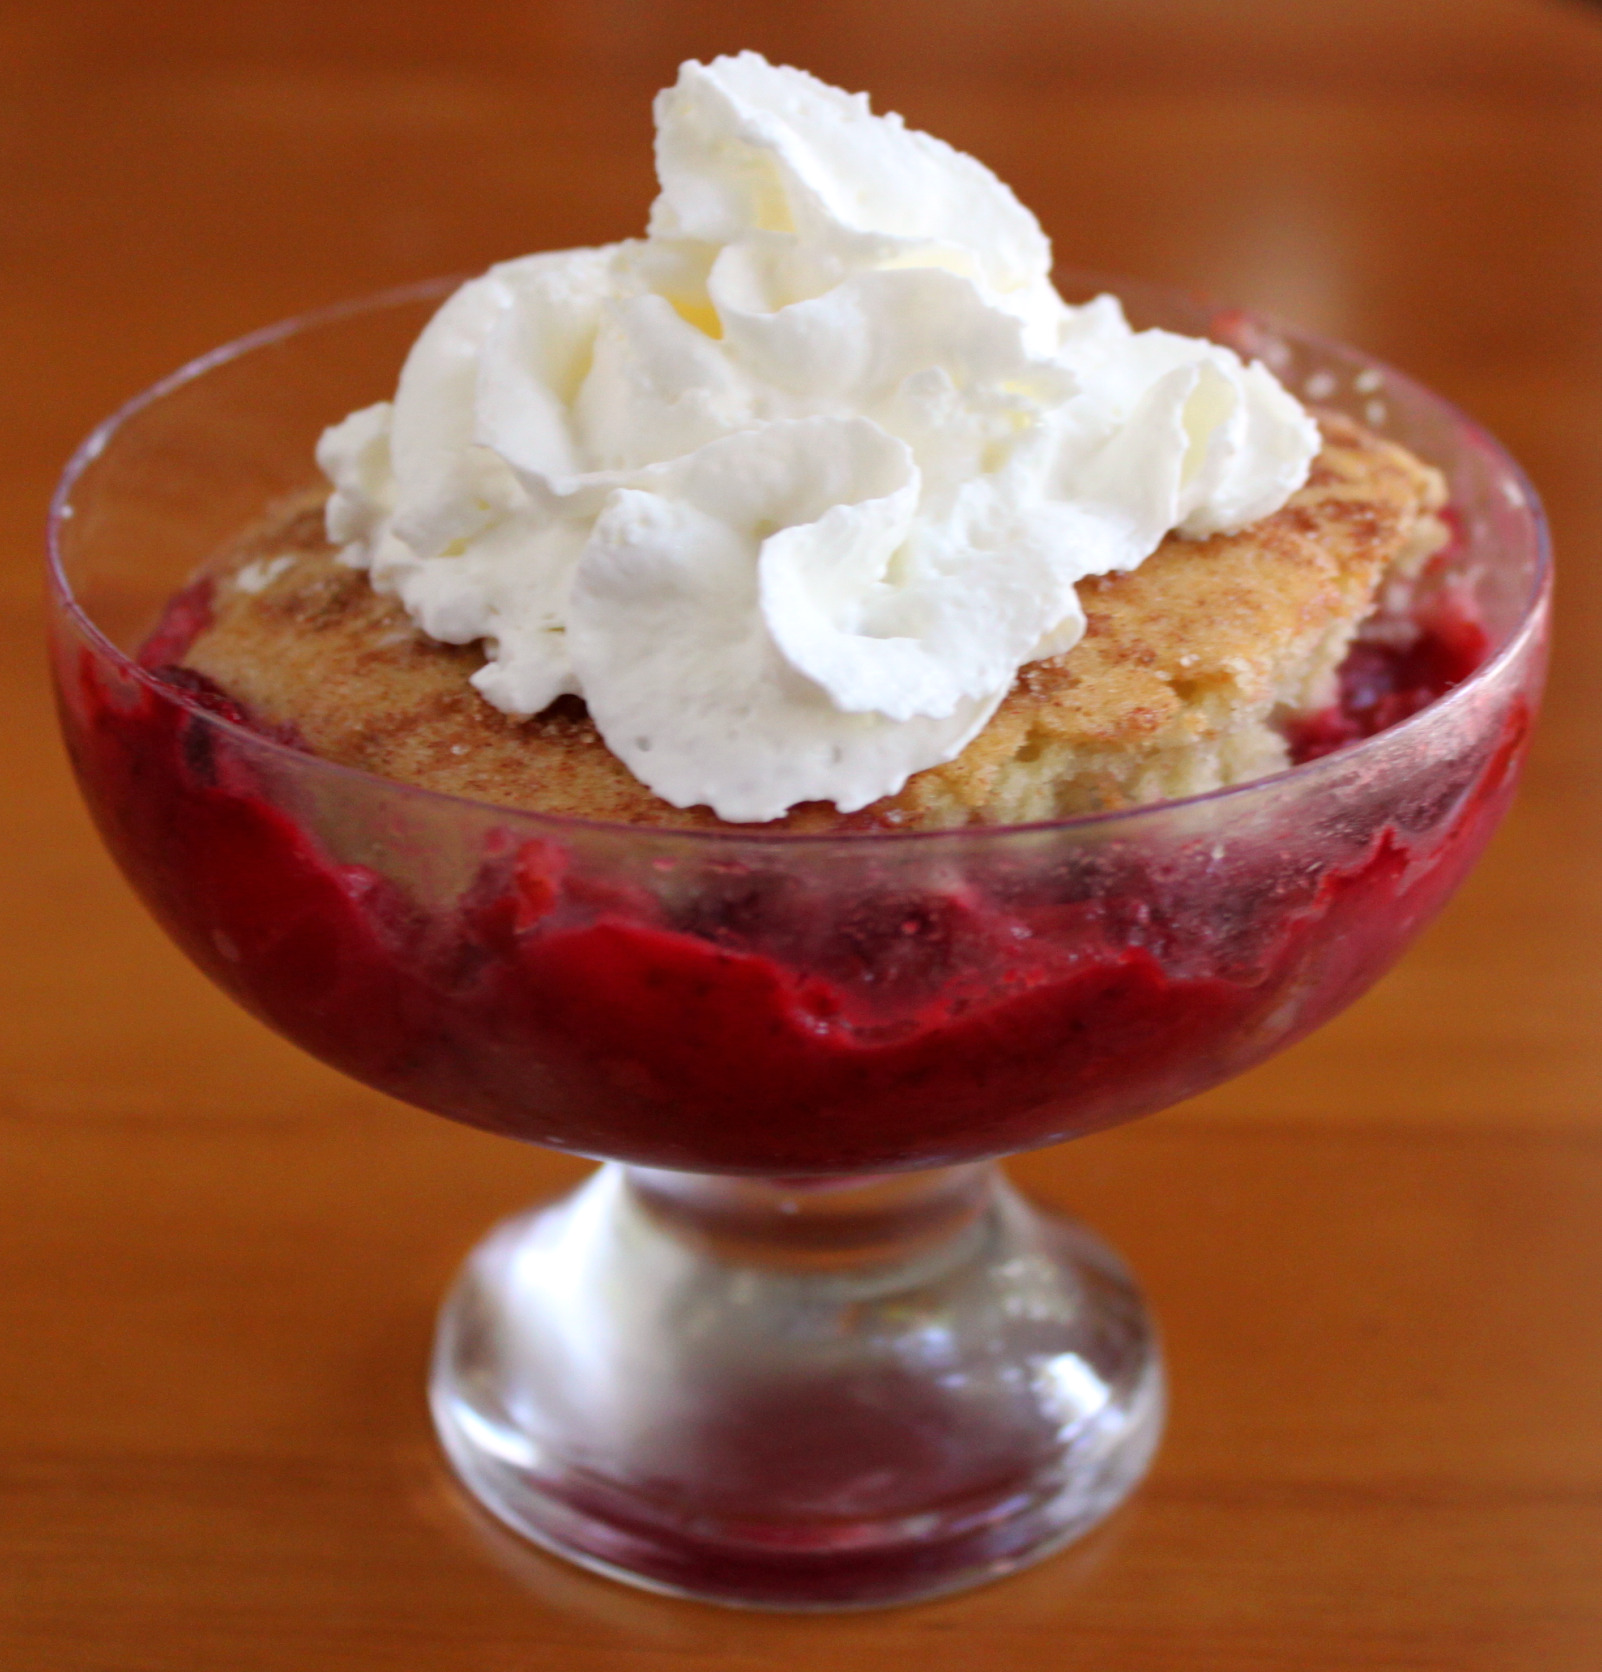 Rhubarb Fruit and Berry Cobbler